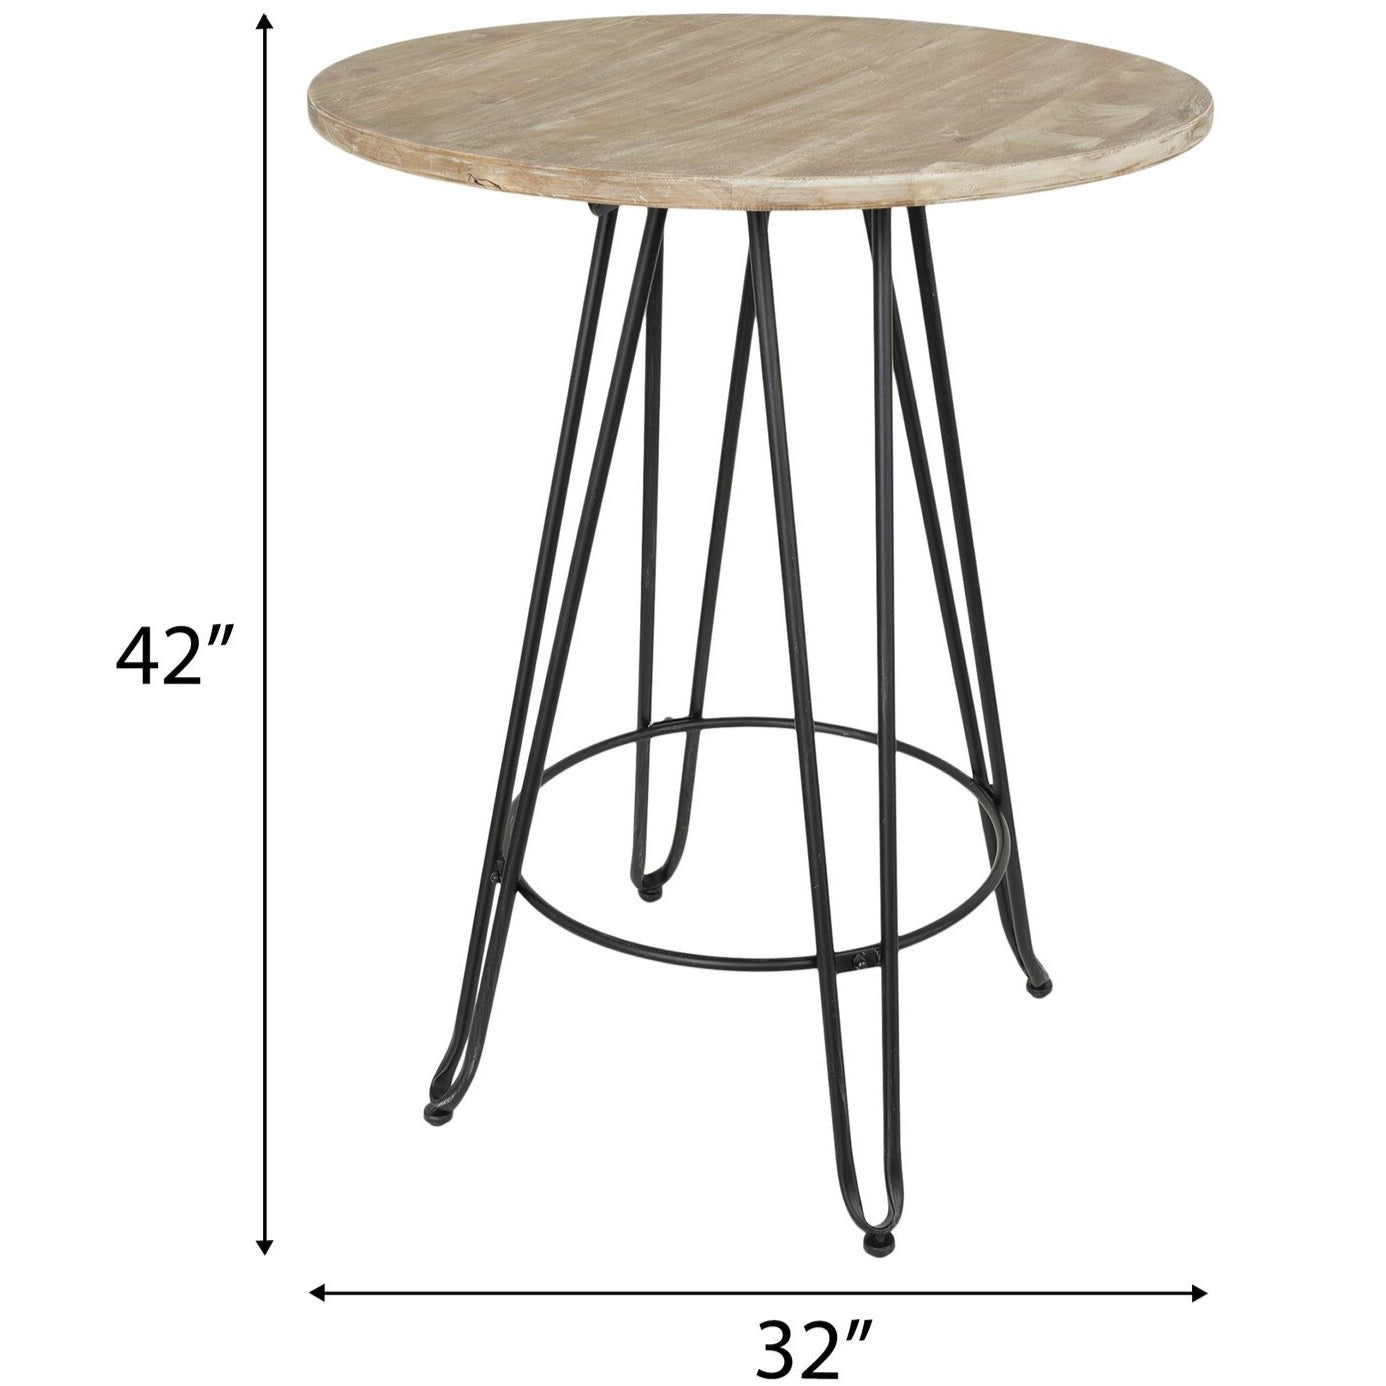 Tall Gathering Table - Danshire Market and Design 